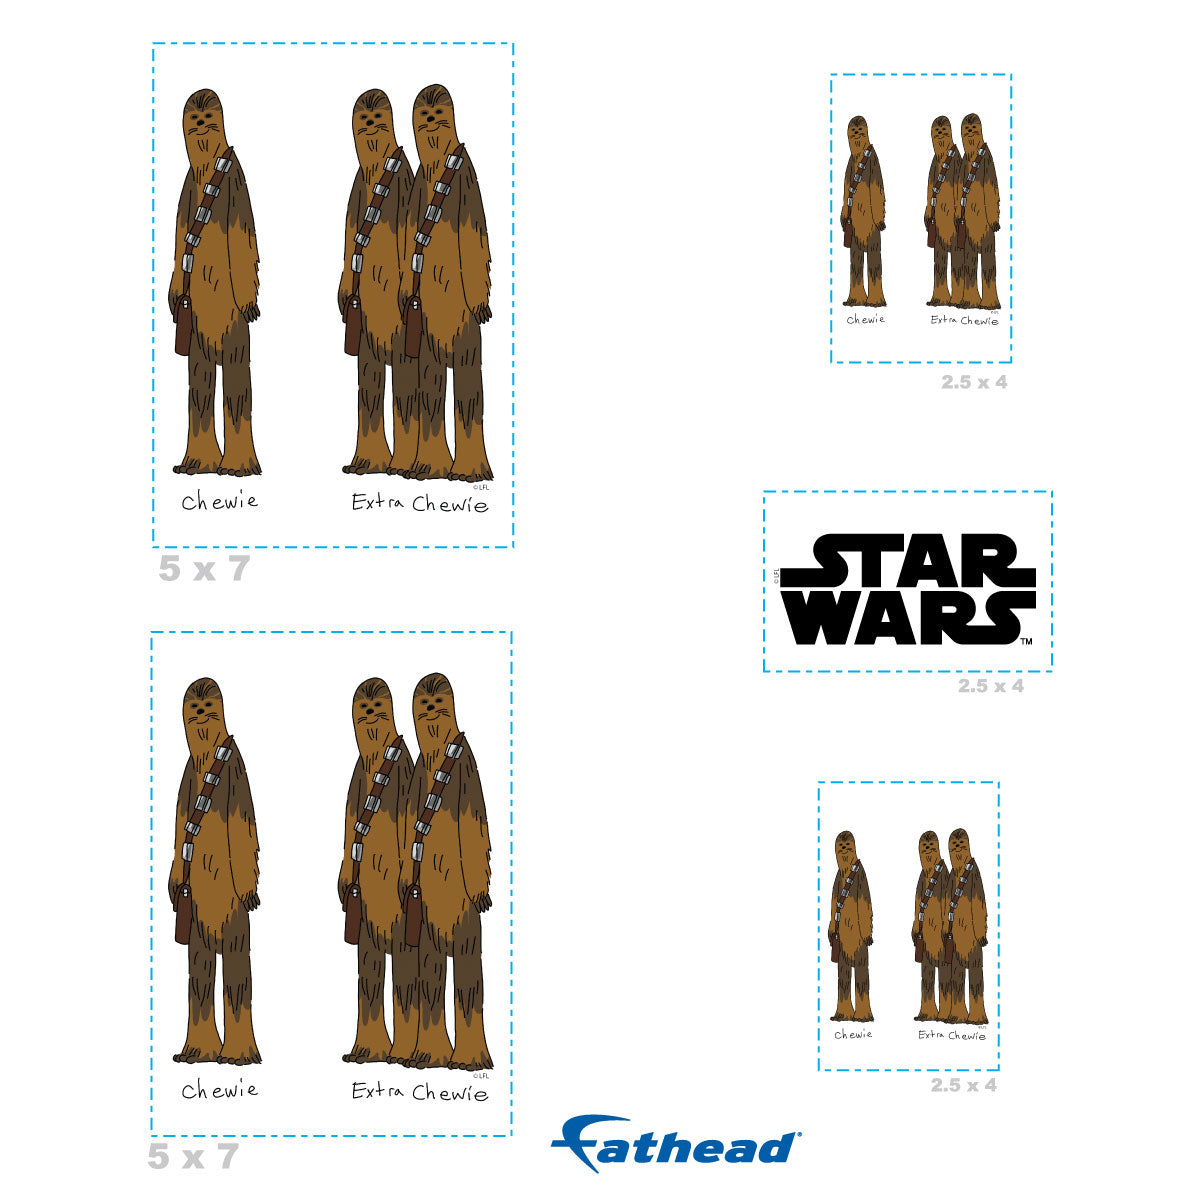 Chewie and Extra Chewie Minis        - Officially Licensed Star Wars Removable     Adhesive Decal